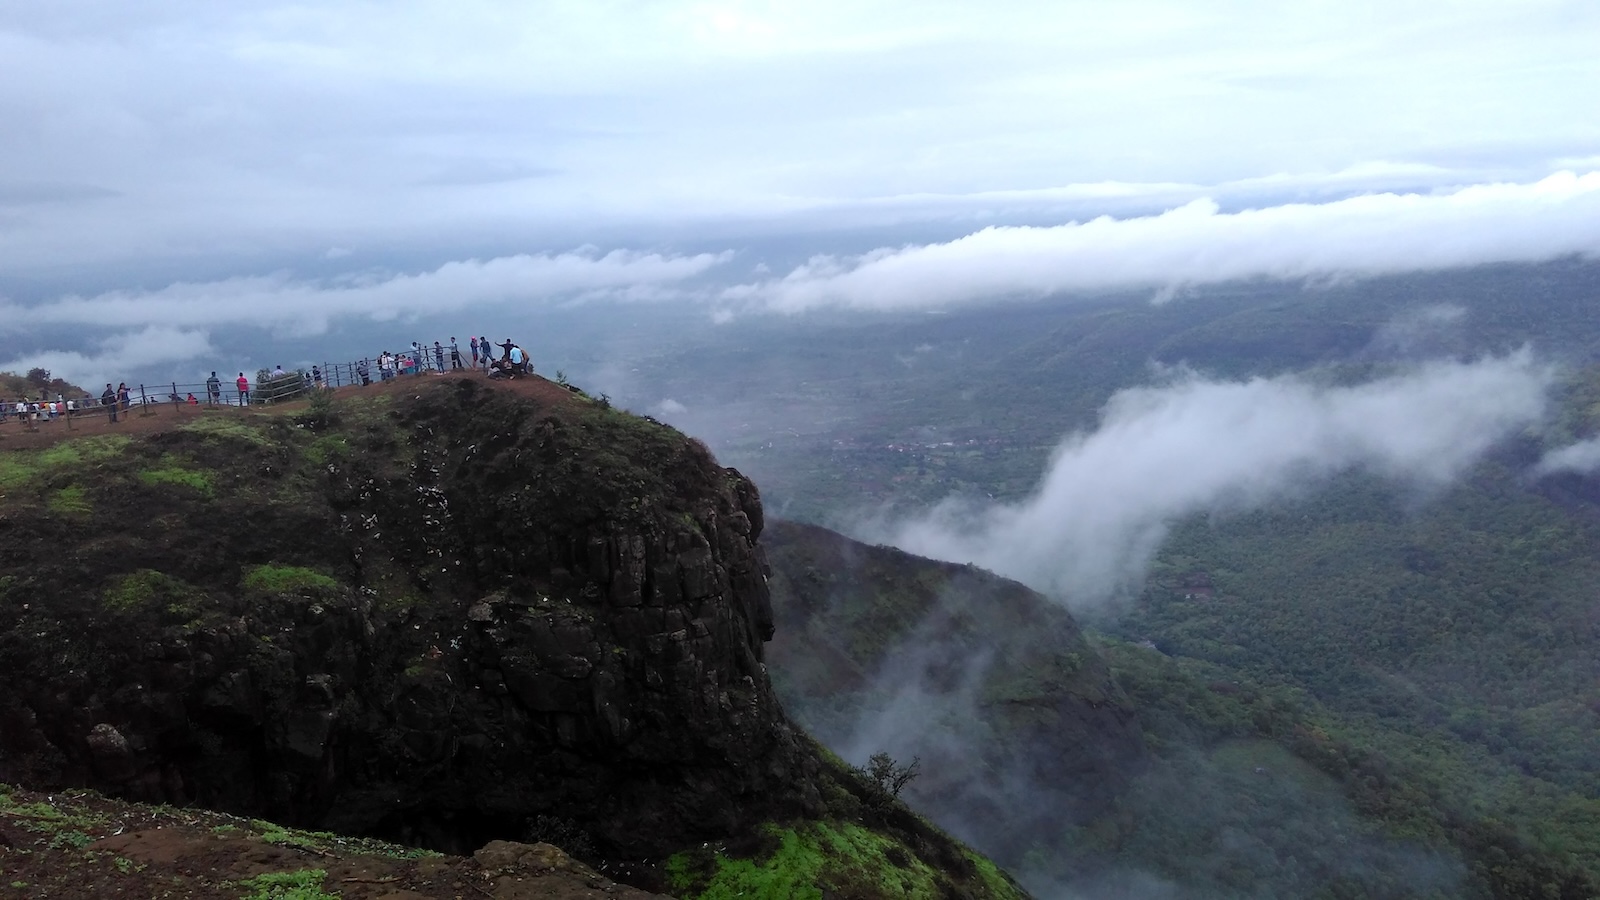 A hill station called Lonavala